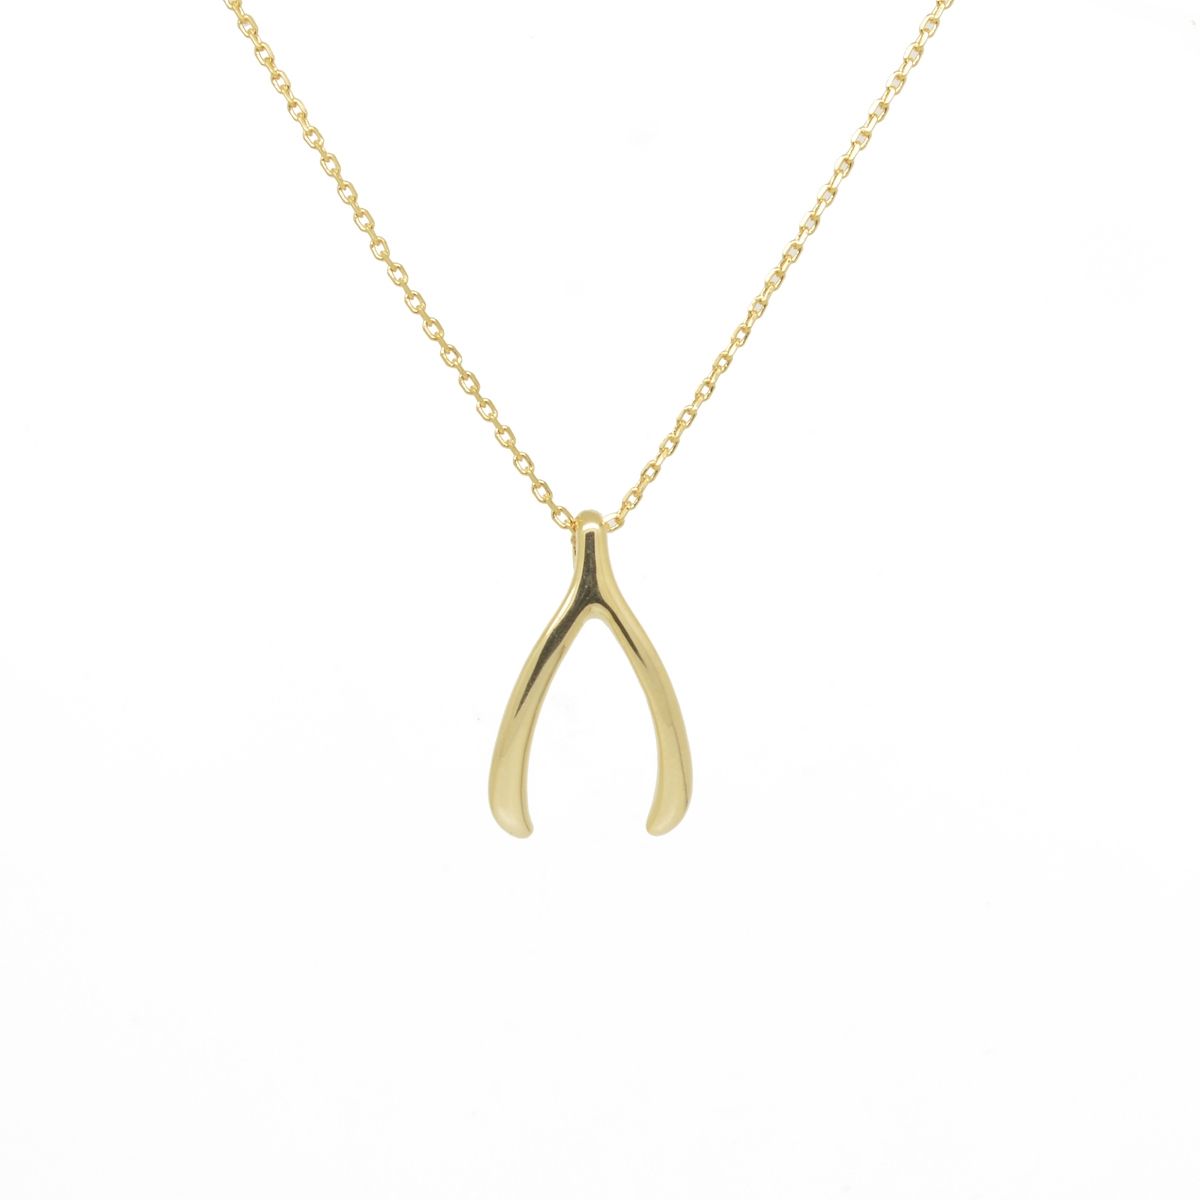 Small Wishbone Necklace In 14k Gold Plate Pertaining To Latest Polished Wishbone Necklaces (View 5 of 25)